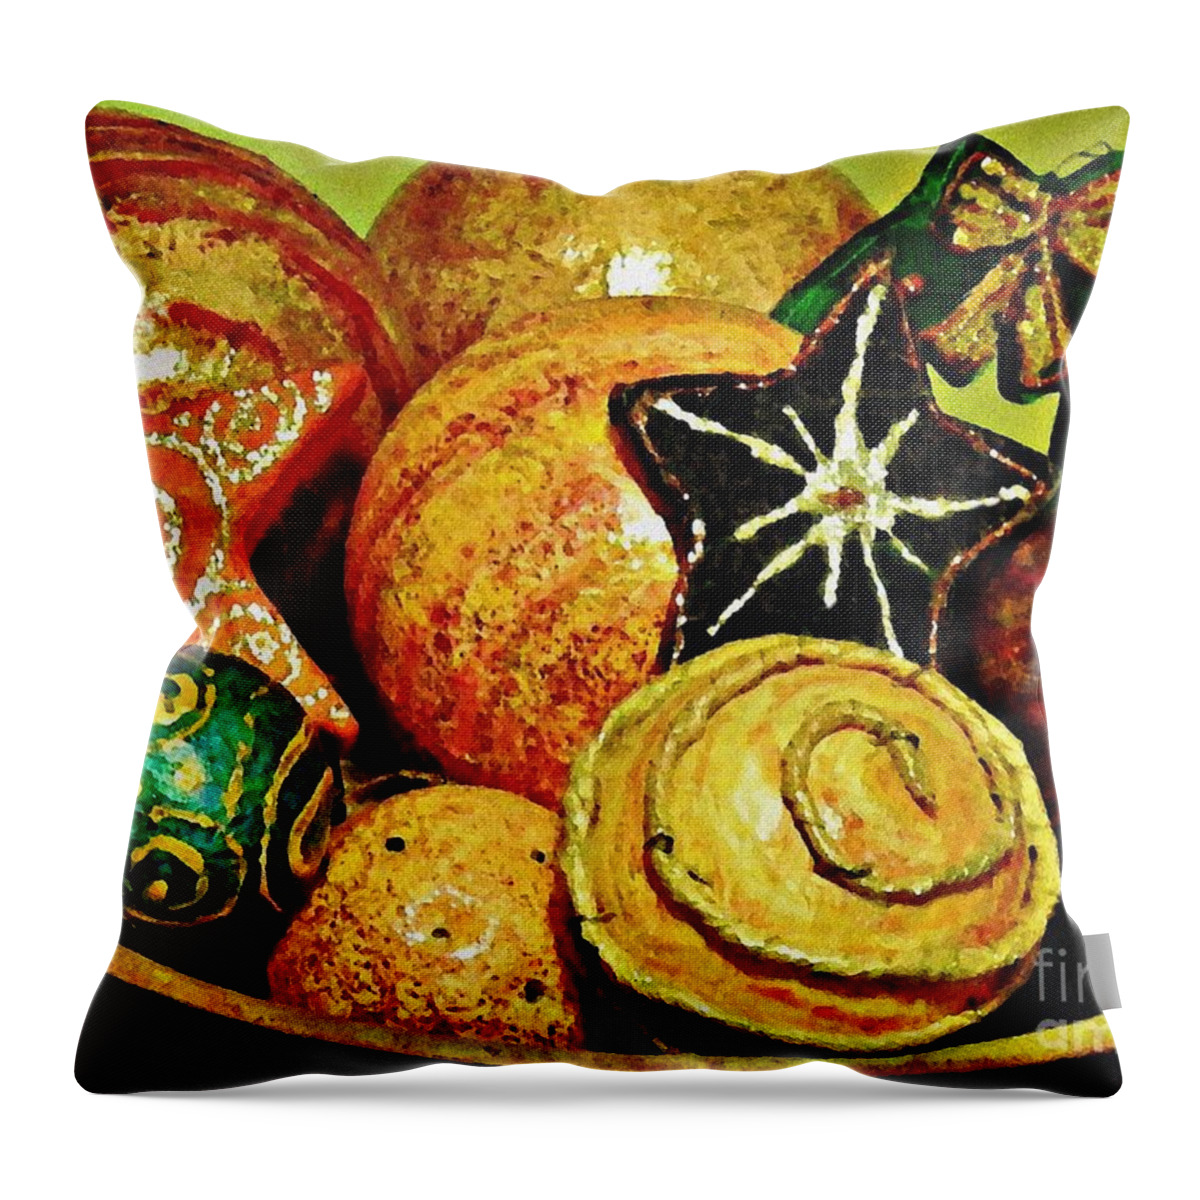 Christmas Throw Pillow featuring the photograph Ornaments by Sarah Loft